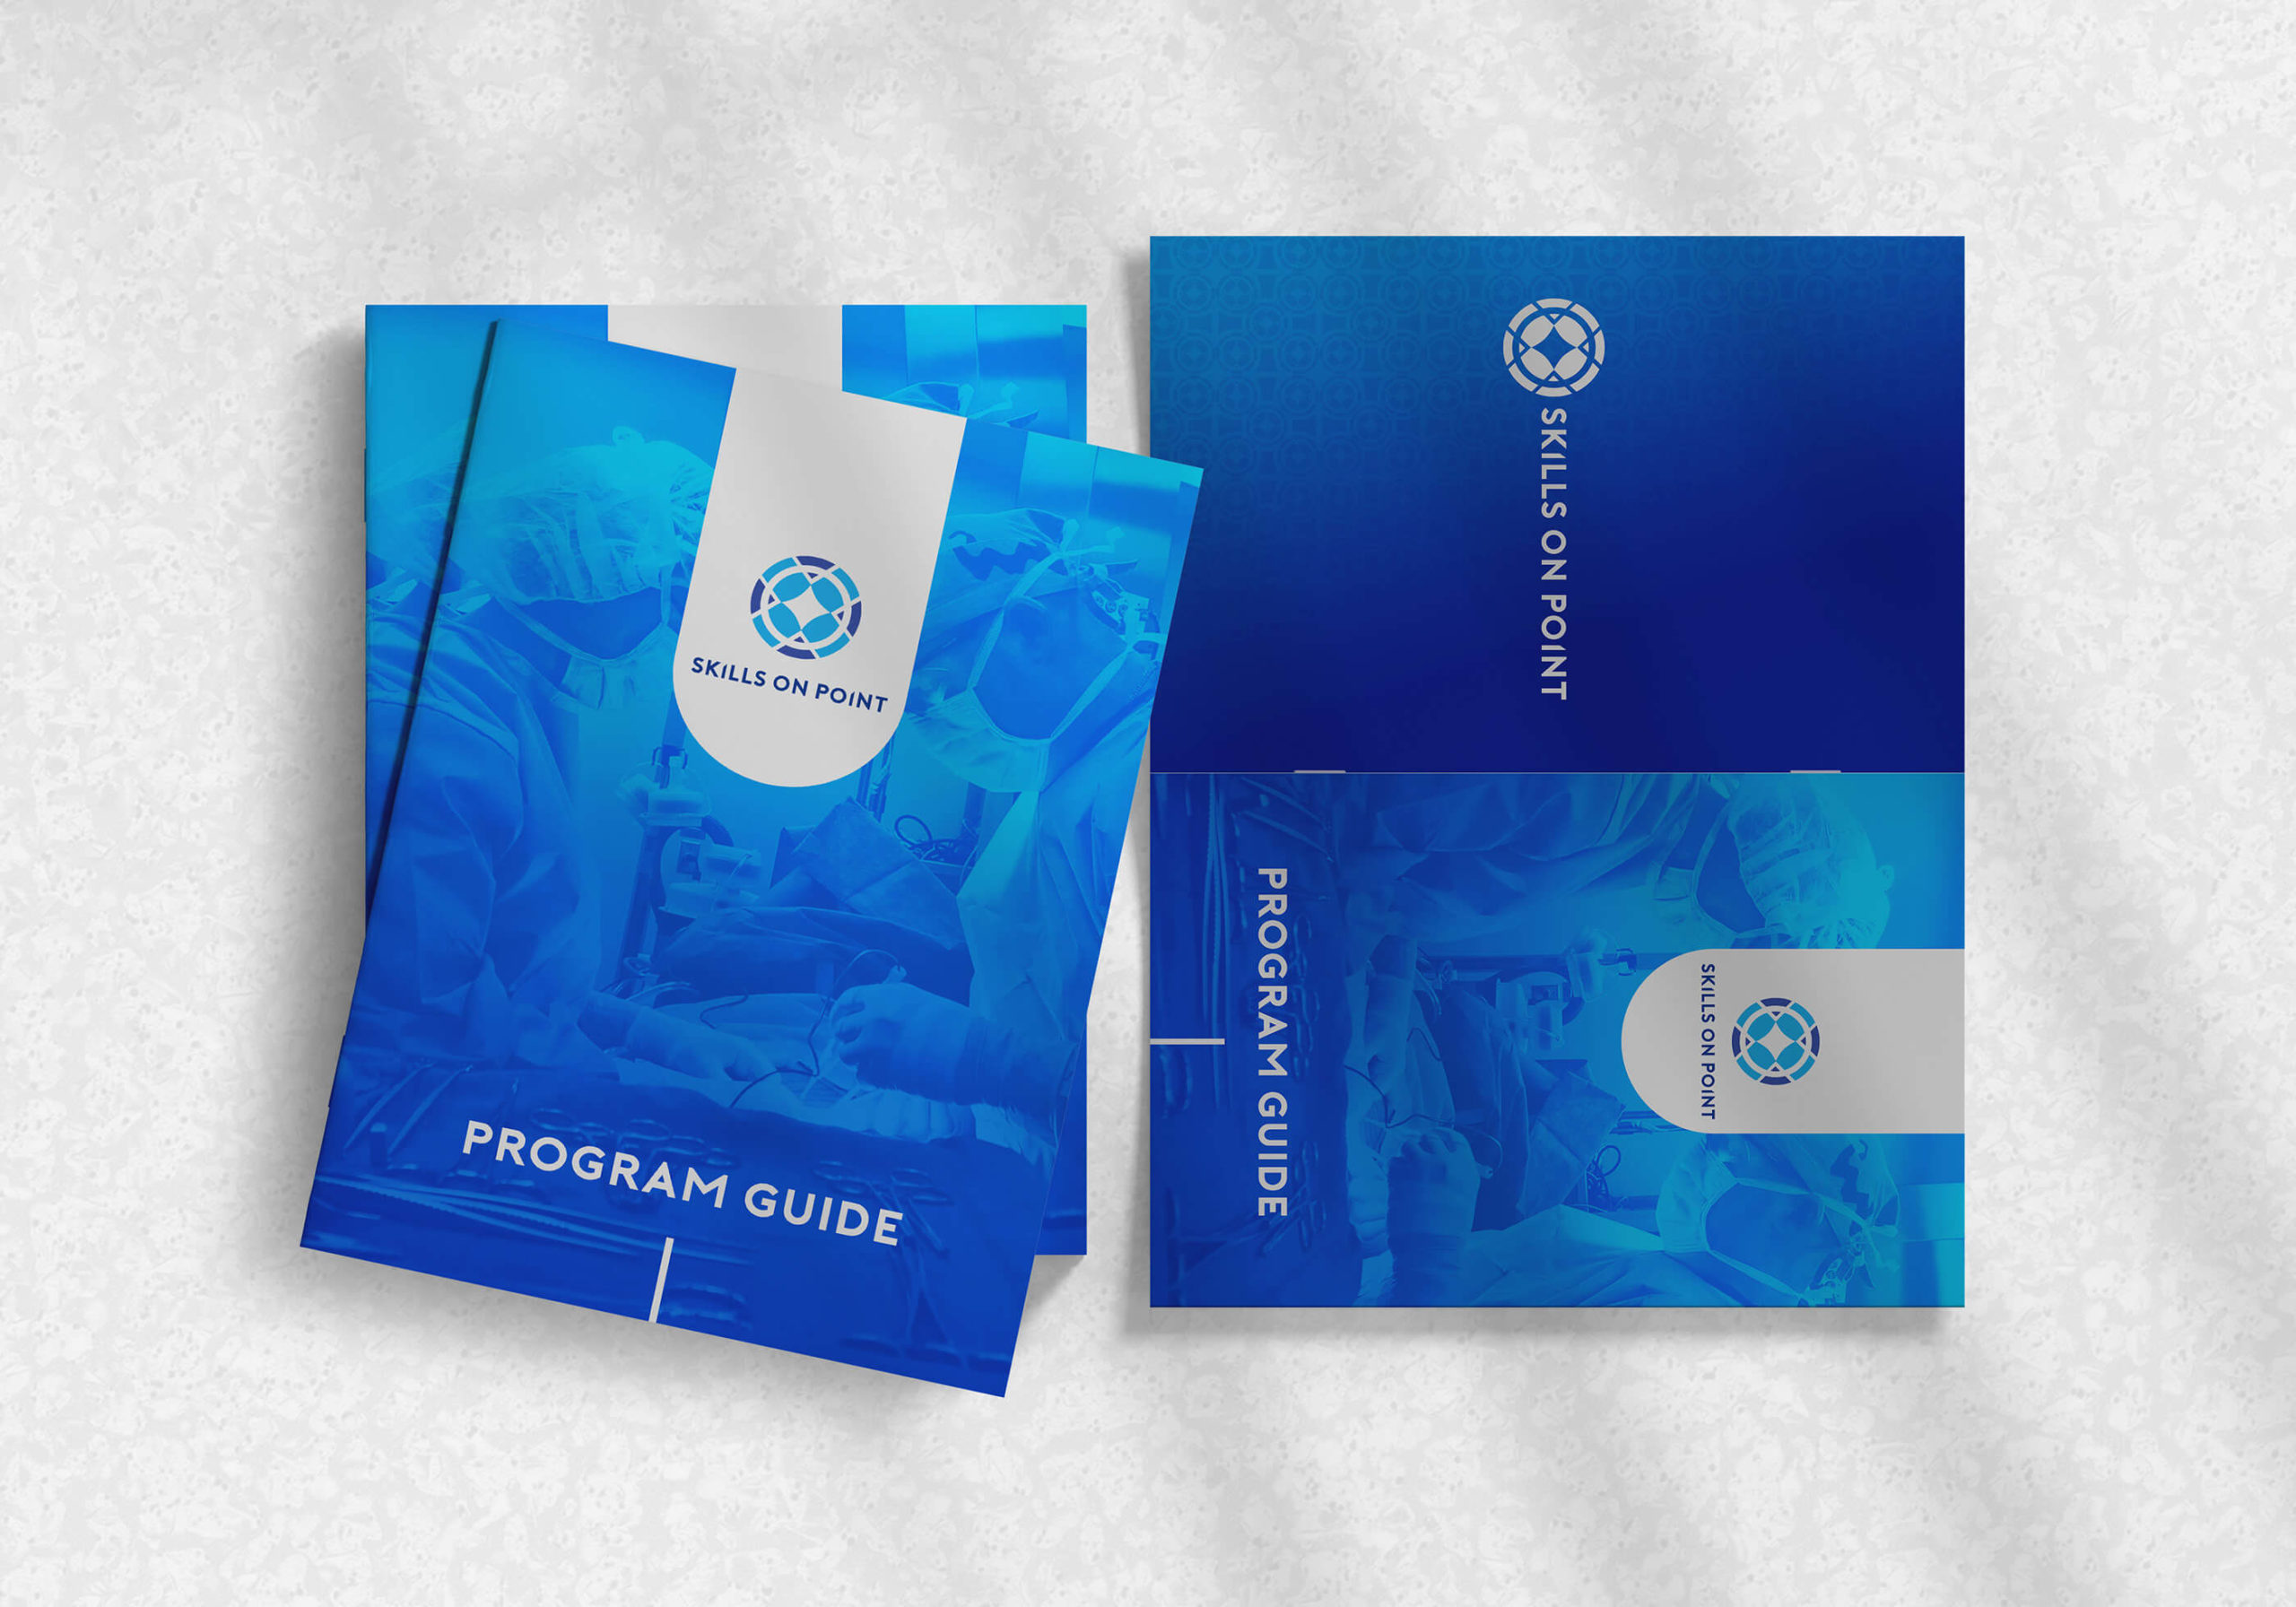 branding skills on point - luccaam ecommerce agency